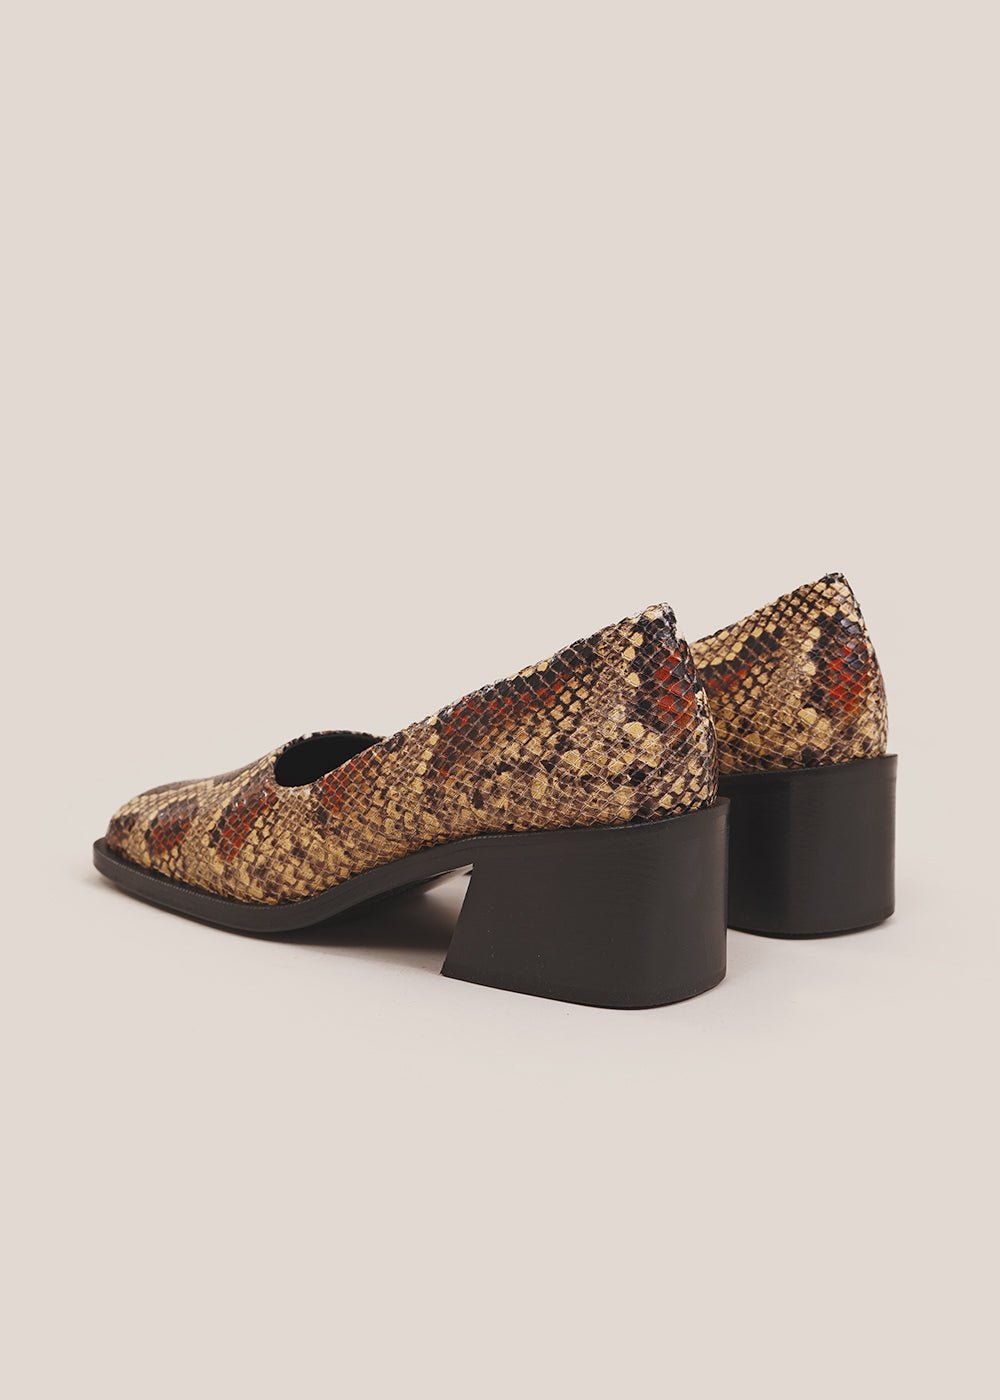 Suzanne Rae Faux Snake Wide Toe Pump - New Classics Studios Sustainable Ethical Fashion Canada